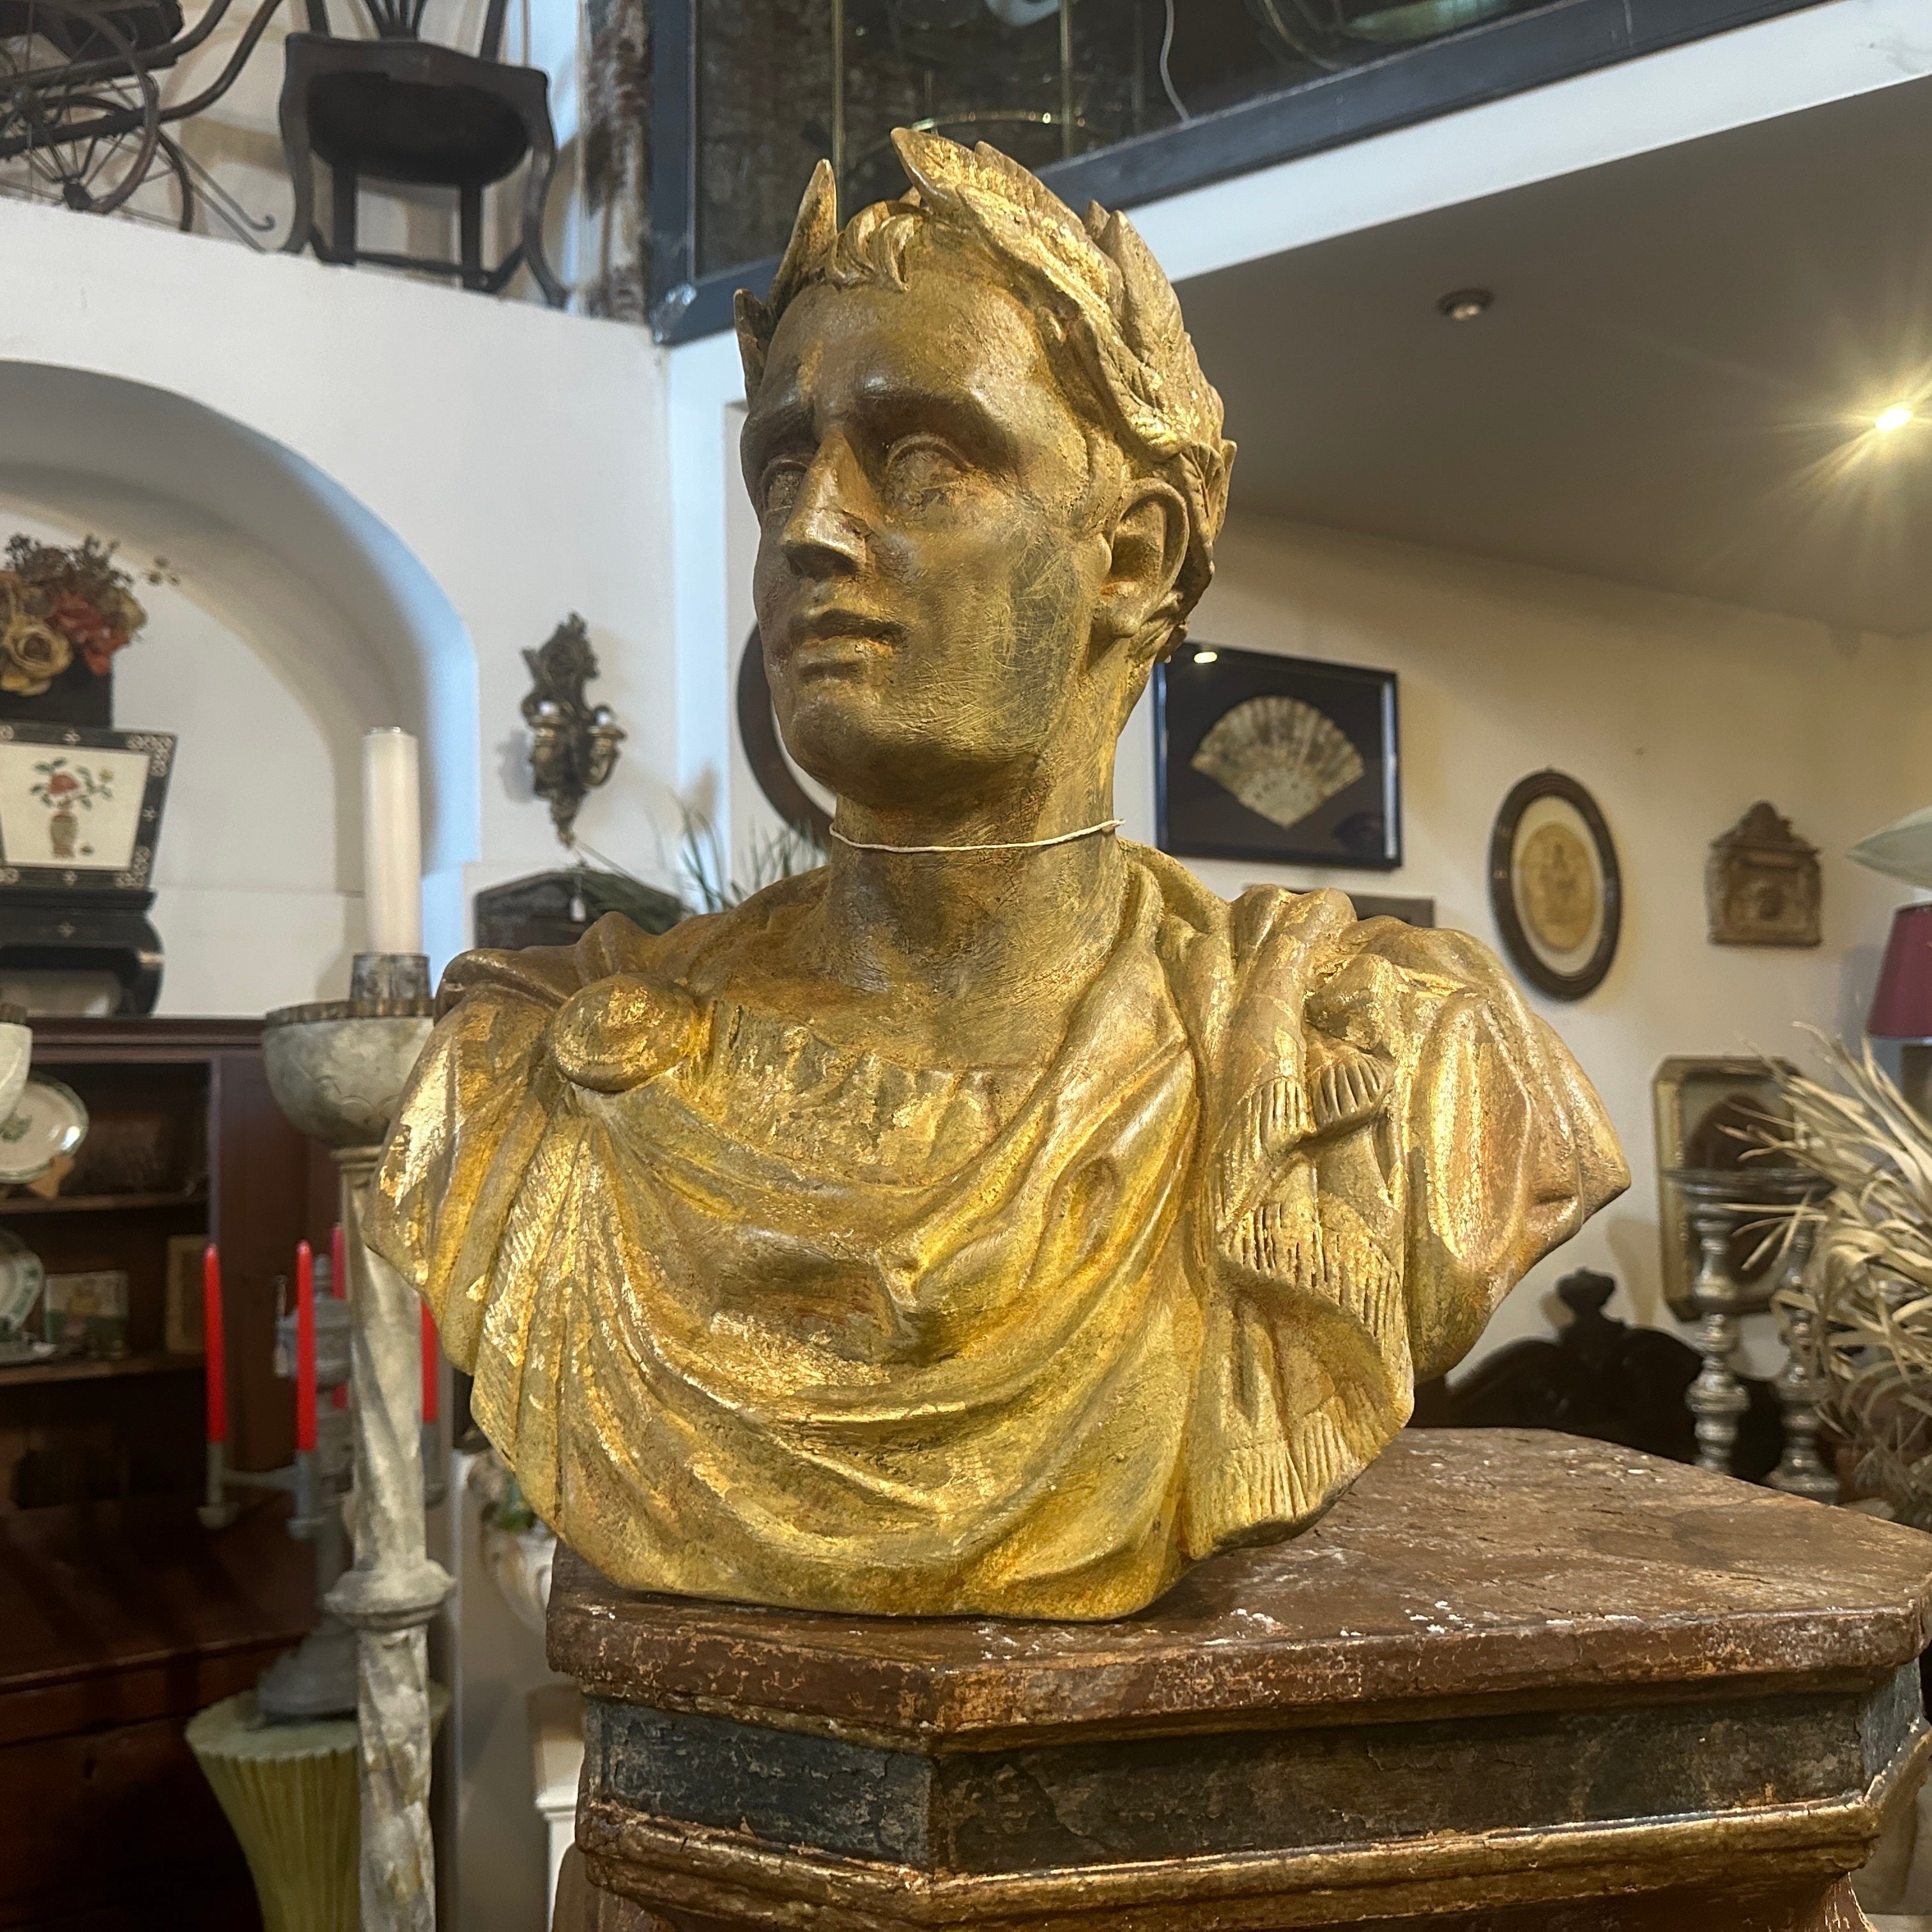 A gold patinated plaster bust of Giulio Cesare from a Gipsoteca in a sicilian academy of fine arts. They used to patinate the plasters in different ways, this one has been made with gold, amber and brown for this amazing result also given of the